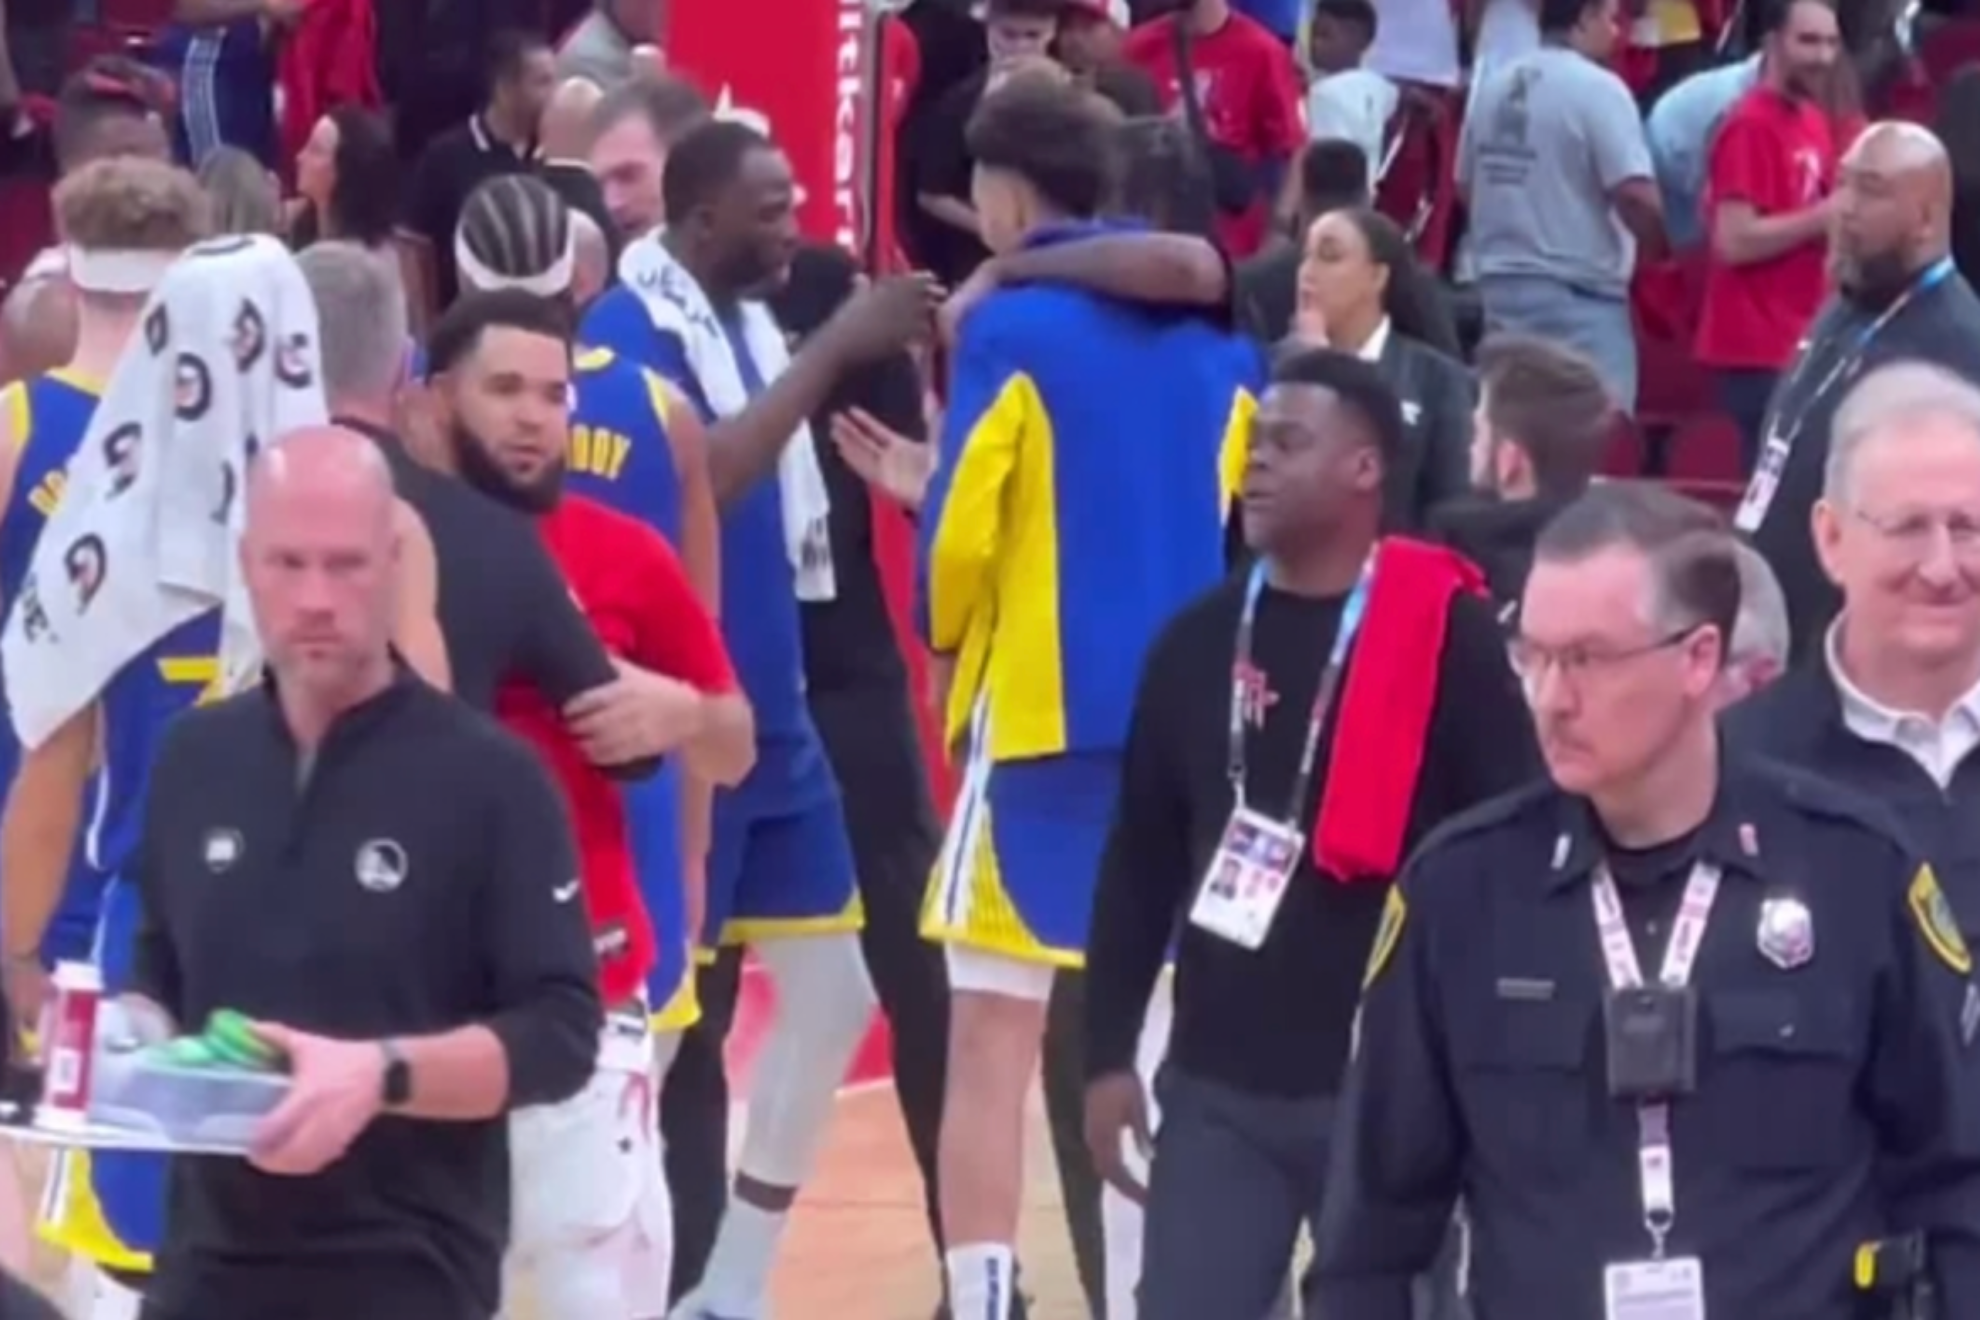 Warriors trolled from the bench by Rockets player Tari Eason... but it backfired